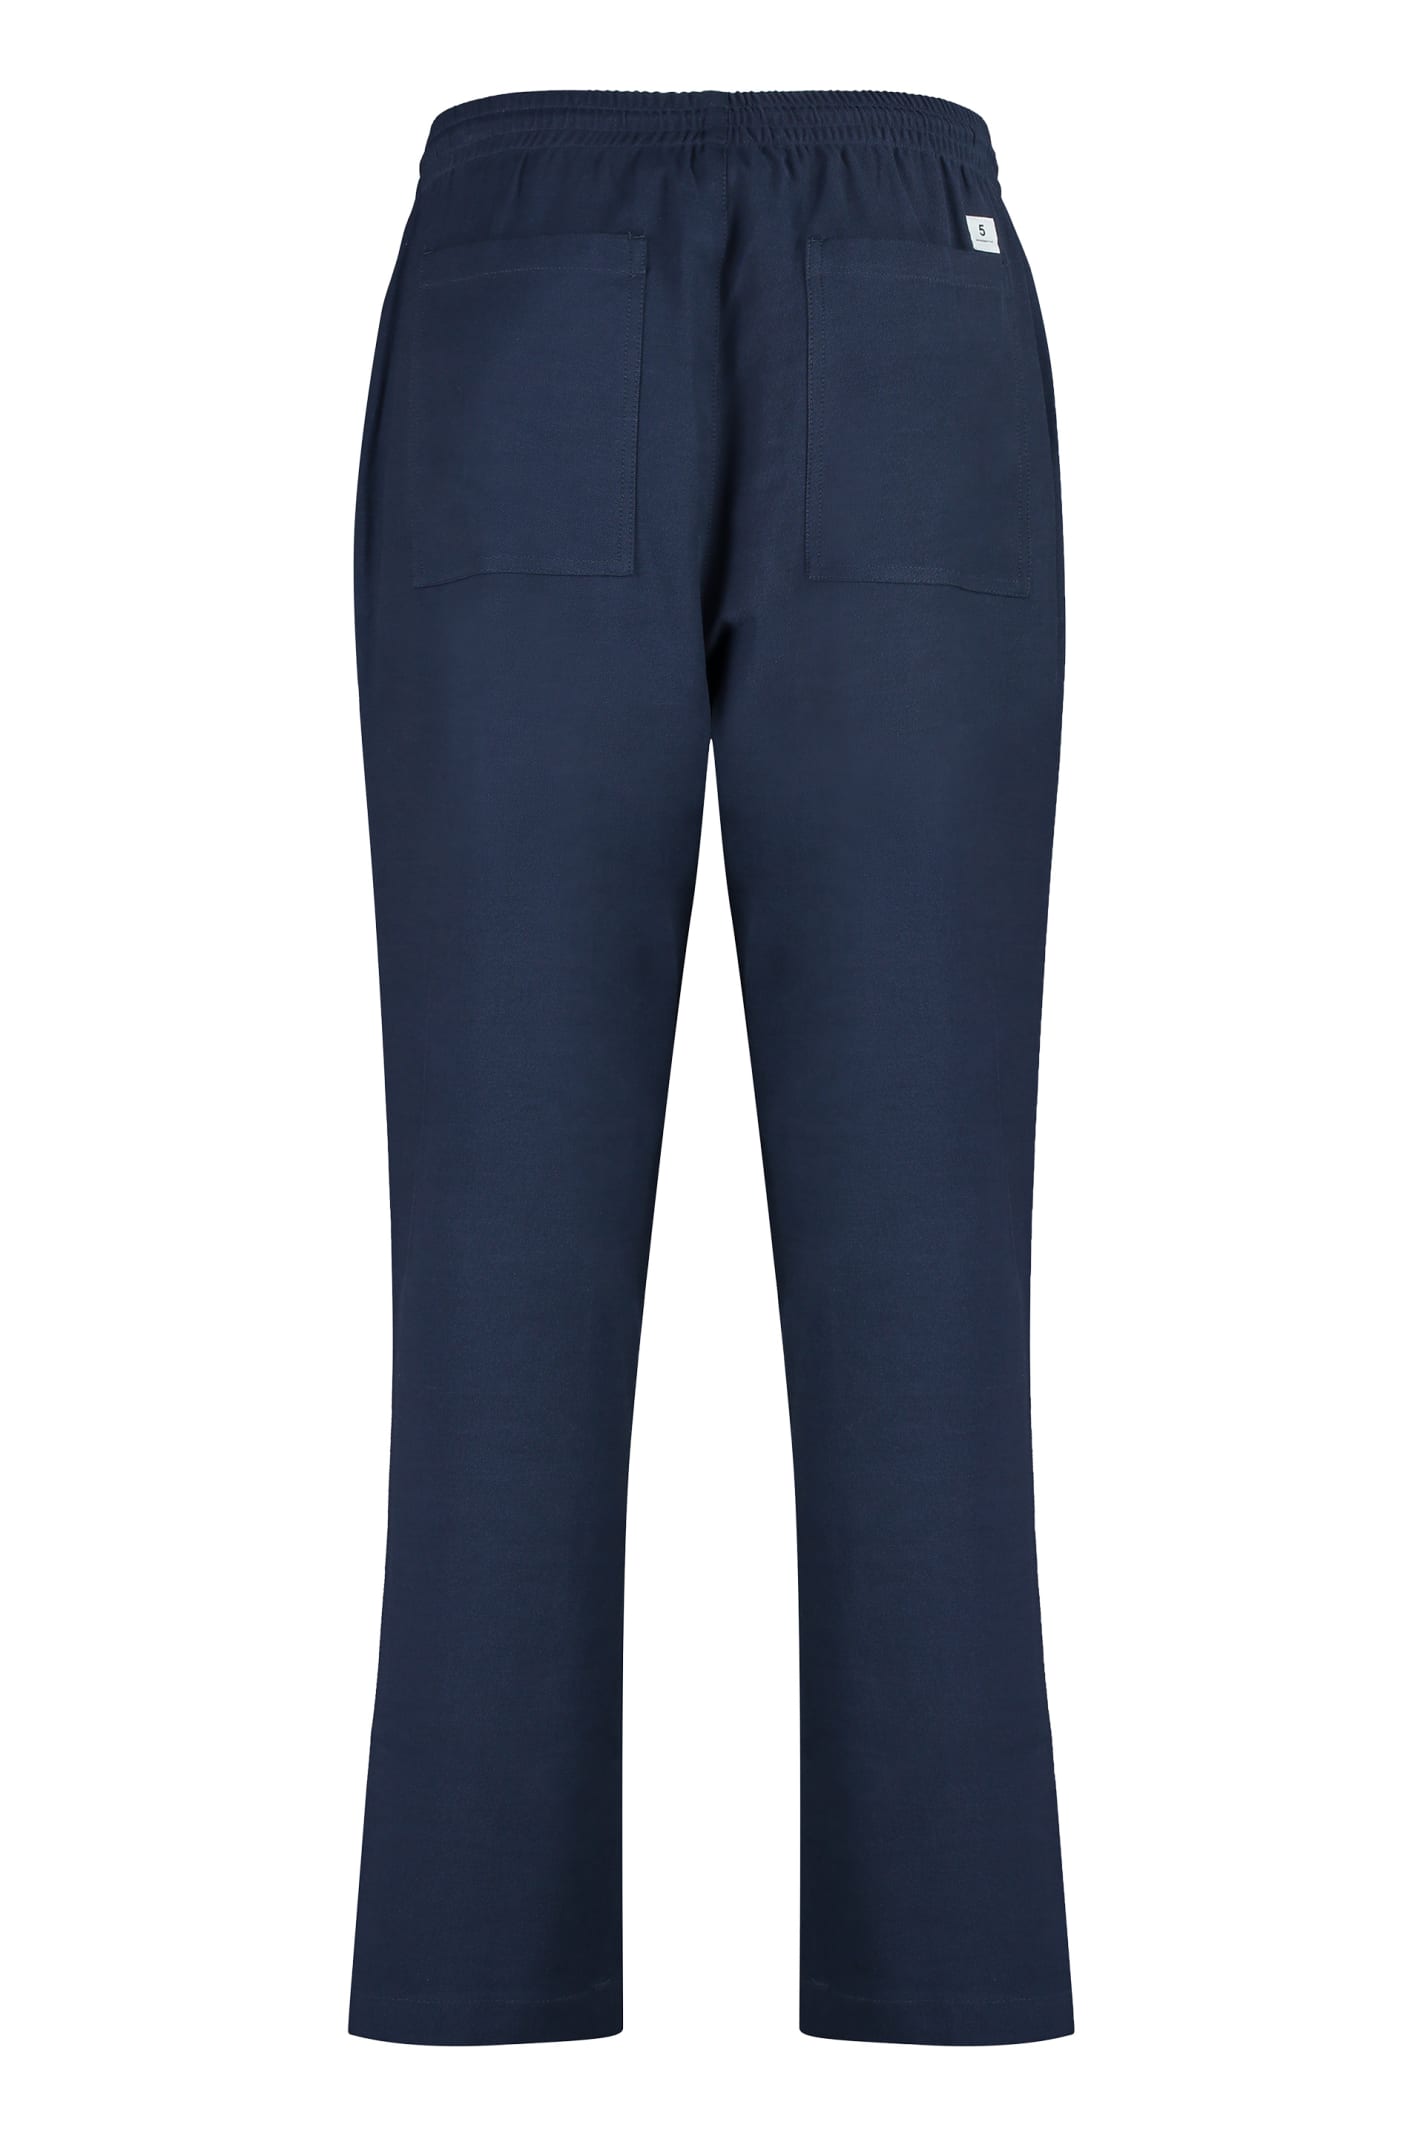 Shop Department Five Brewery Cotton Blend Trousers In Blue